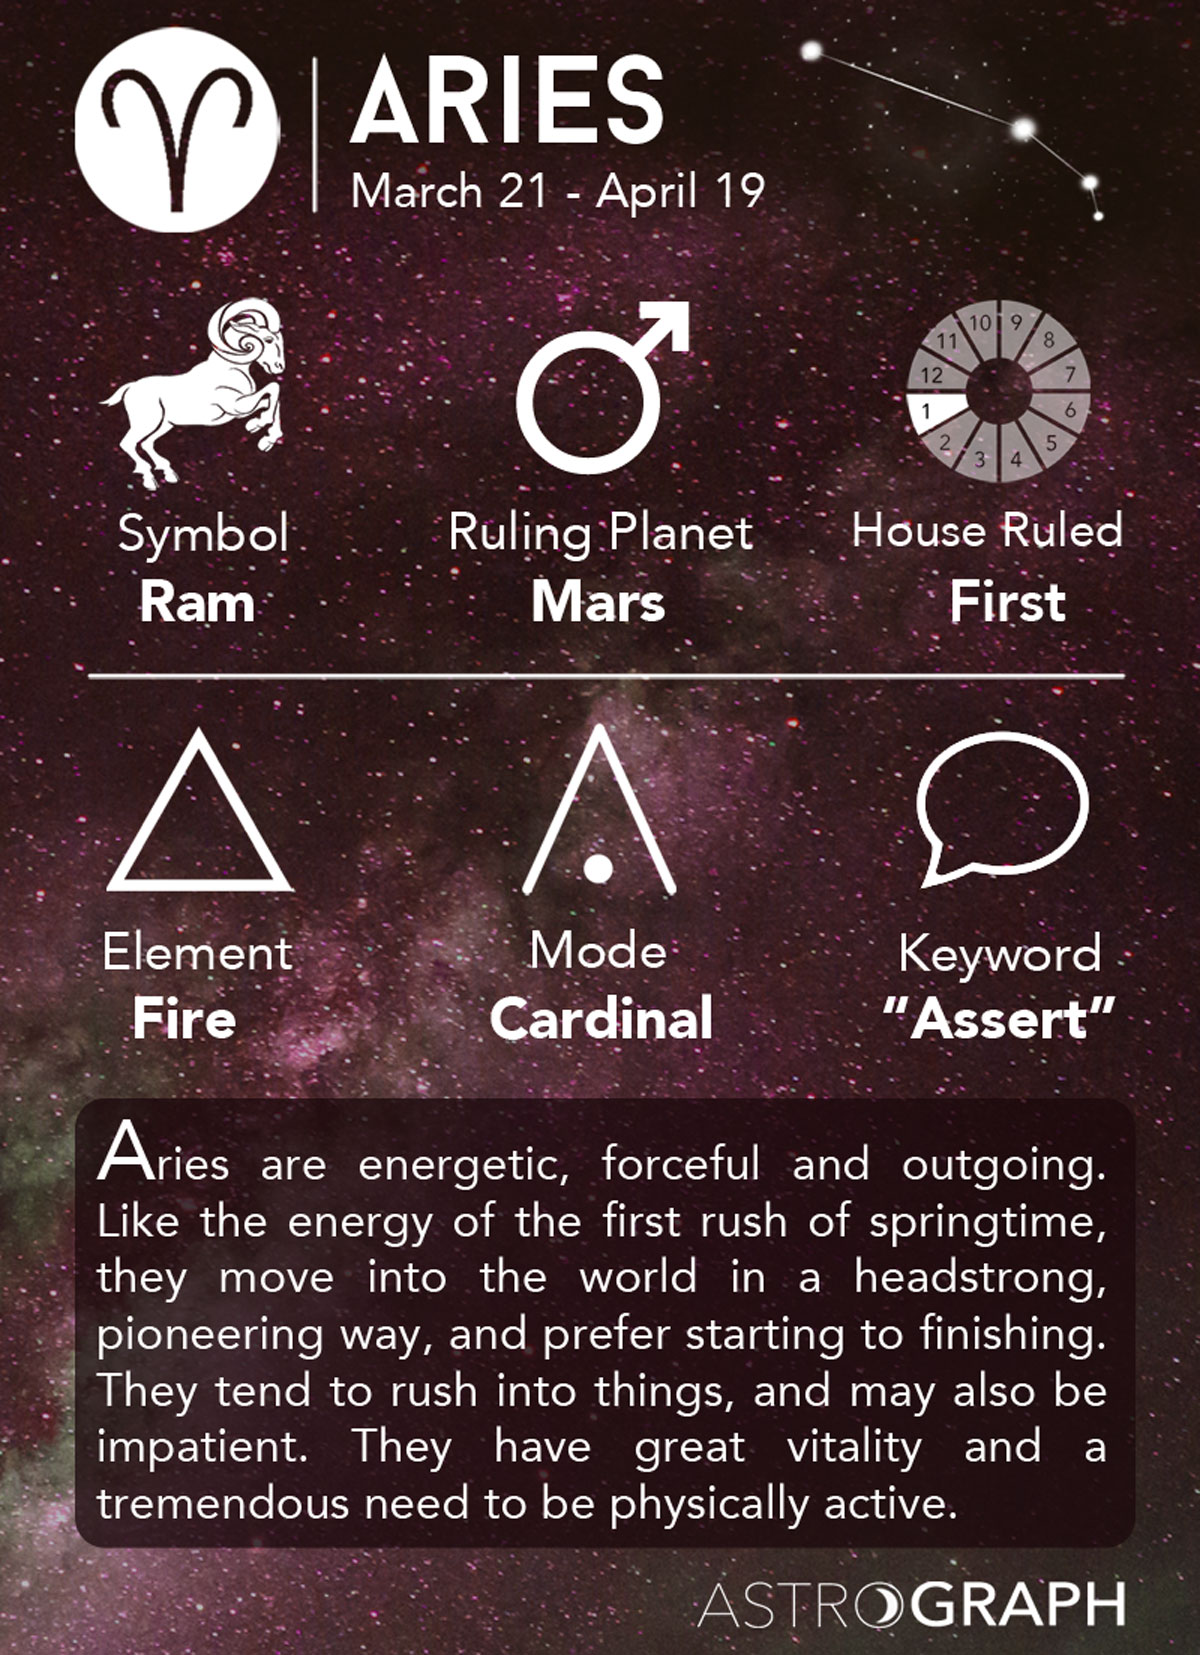 ASTROGRAPH - Aries in Astrology